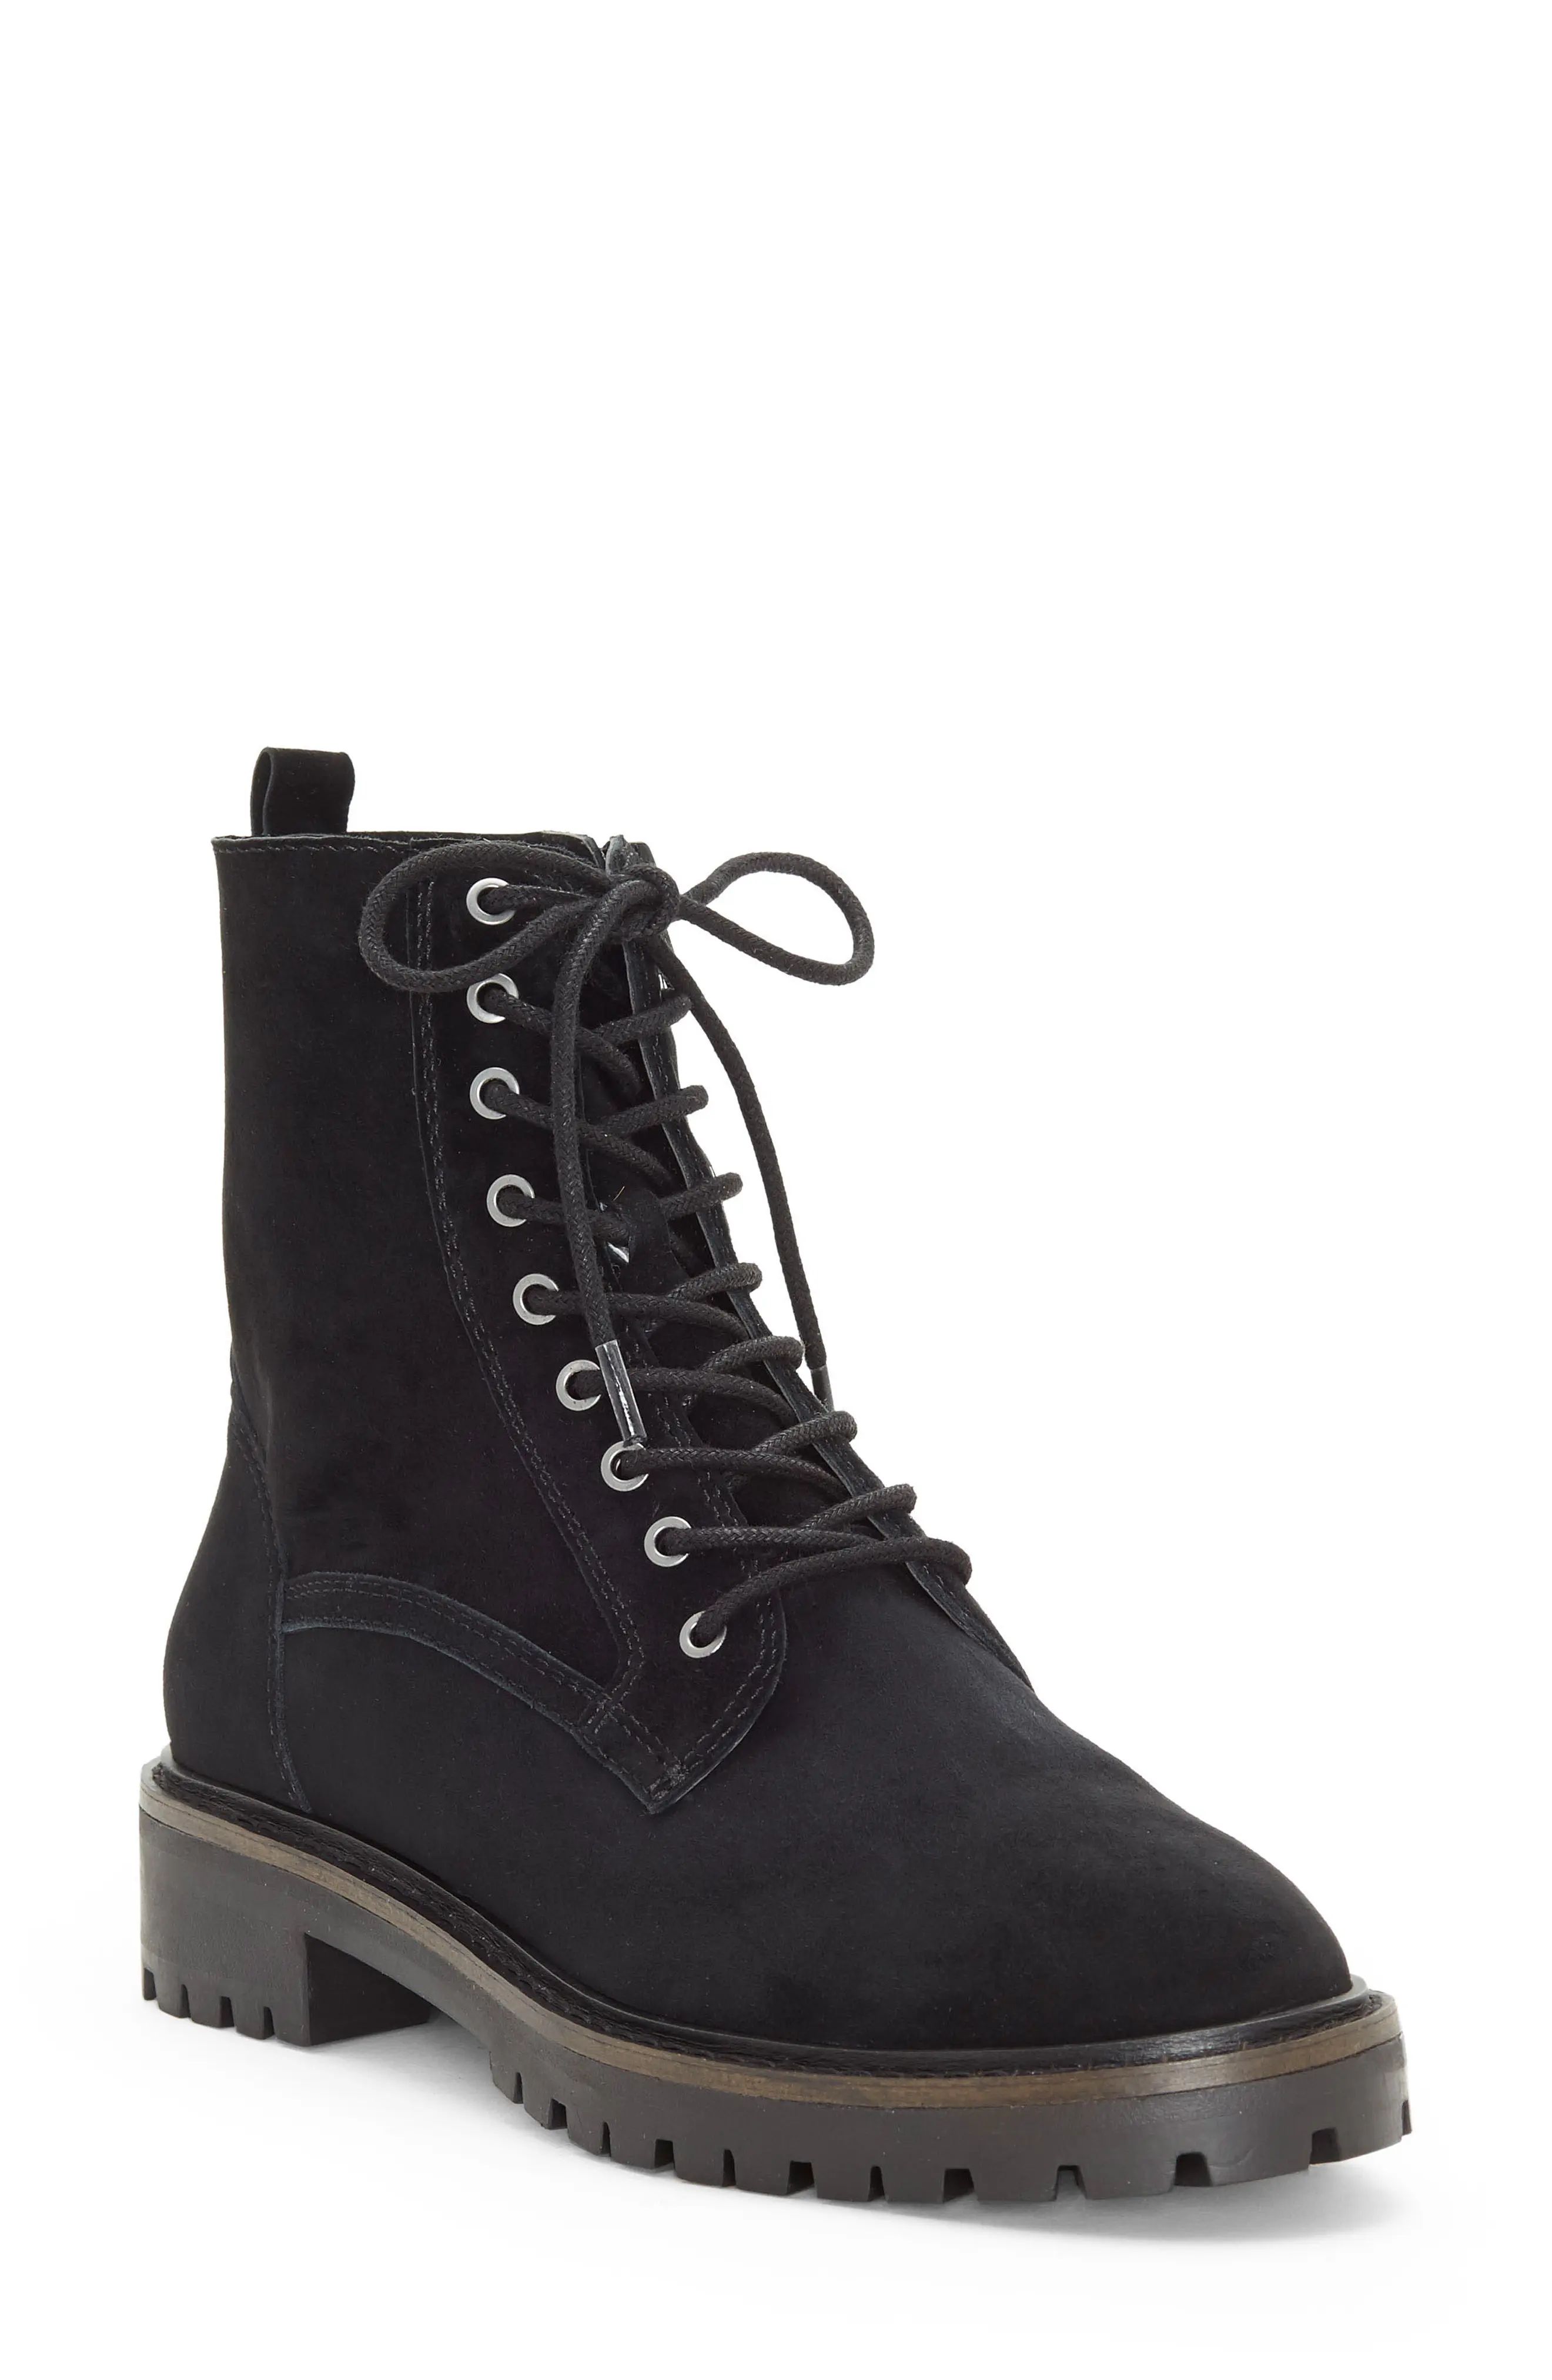 Women's Lucky Brand Idara Lace-Up Bootie, Size 5 M - Black | Nordstrom